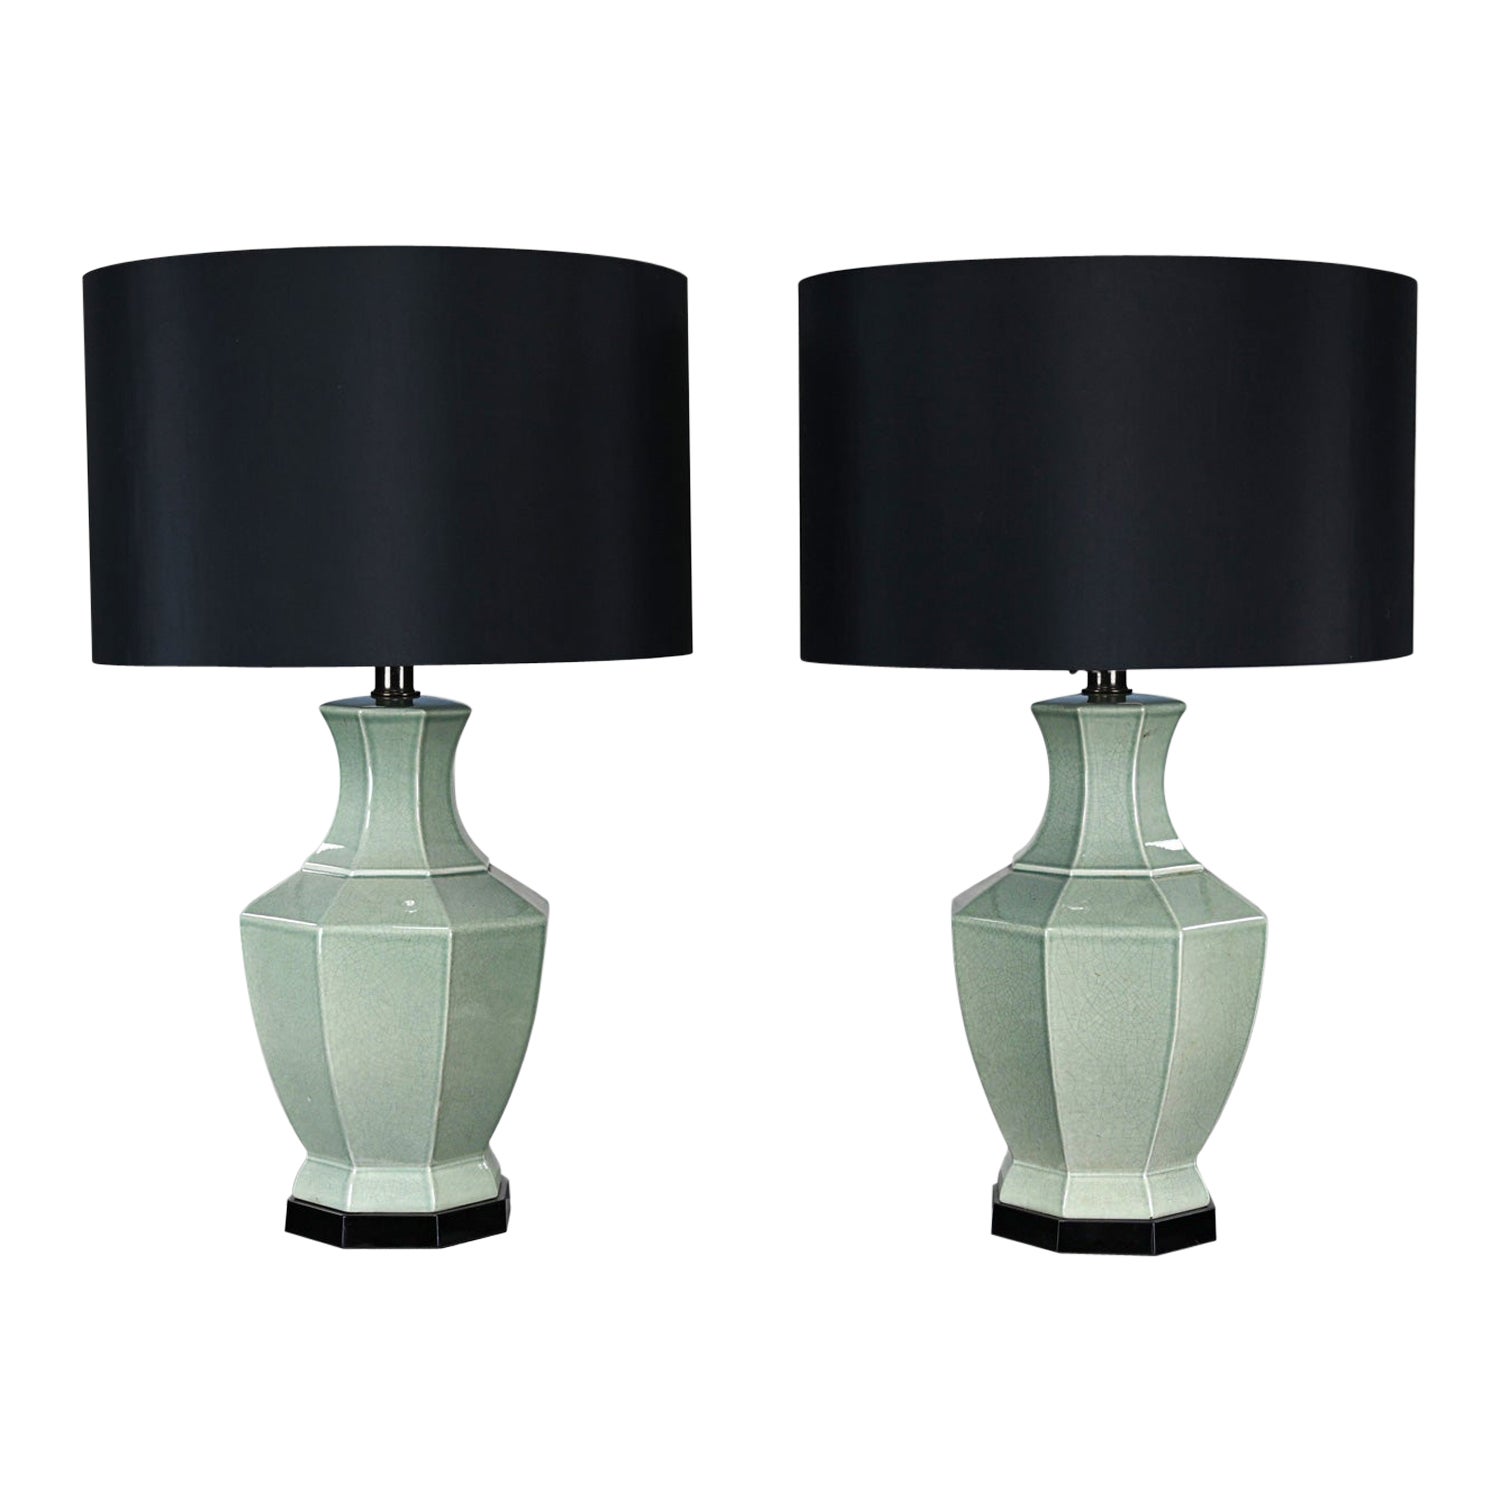 Pair Chinoiserie Celadon Jade Green Celadon Octagon Urn Table Lamps Black Shades For Sale